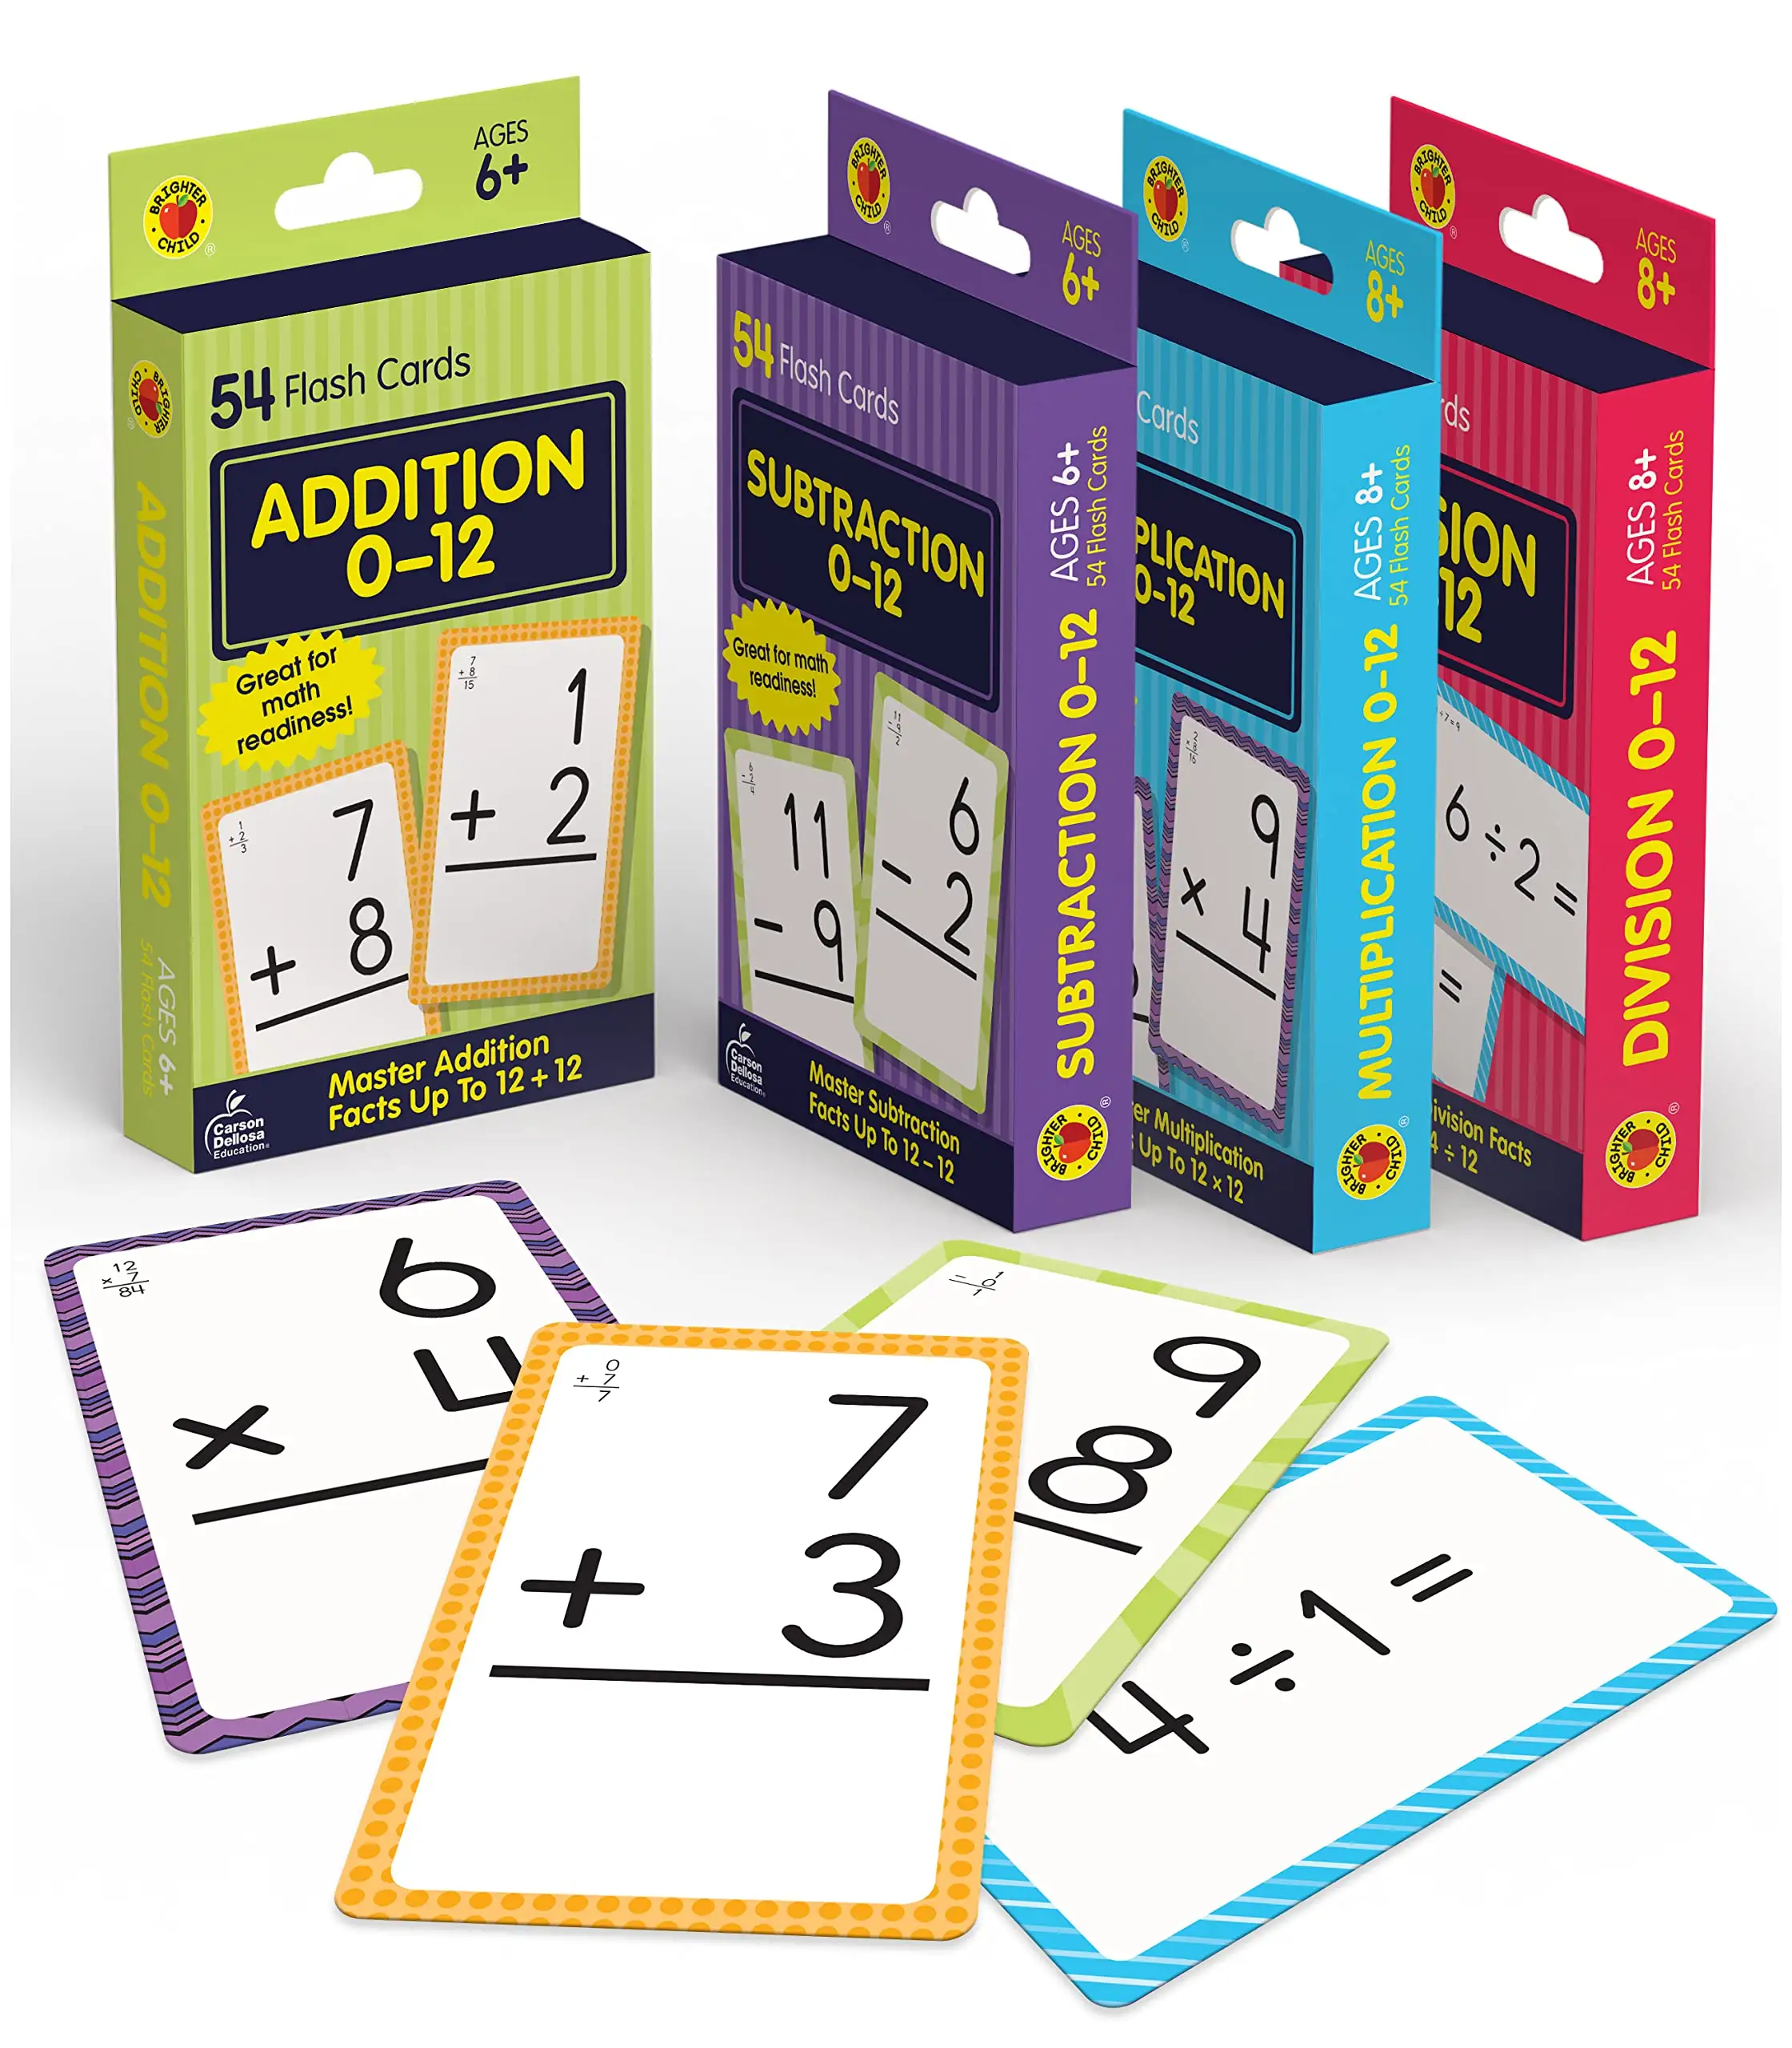 Custom 6+ Ages Double-sided 54 Cards Maths Flash Cards Set For Kids Early Educational